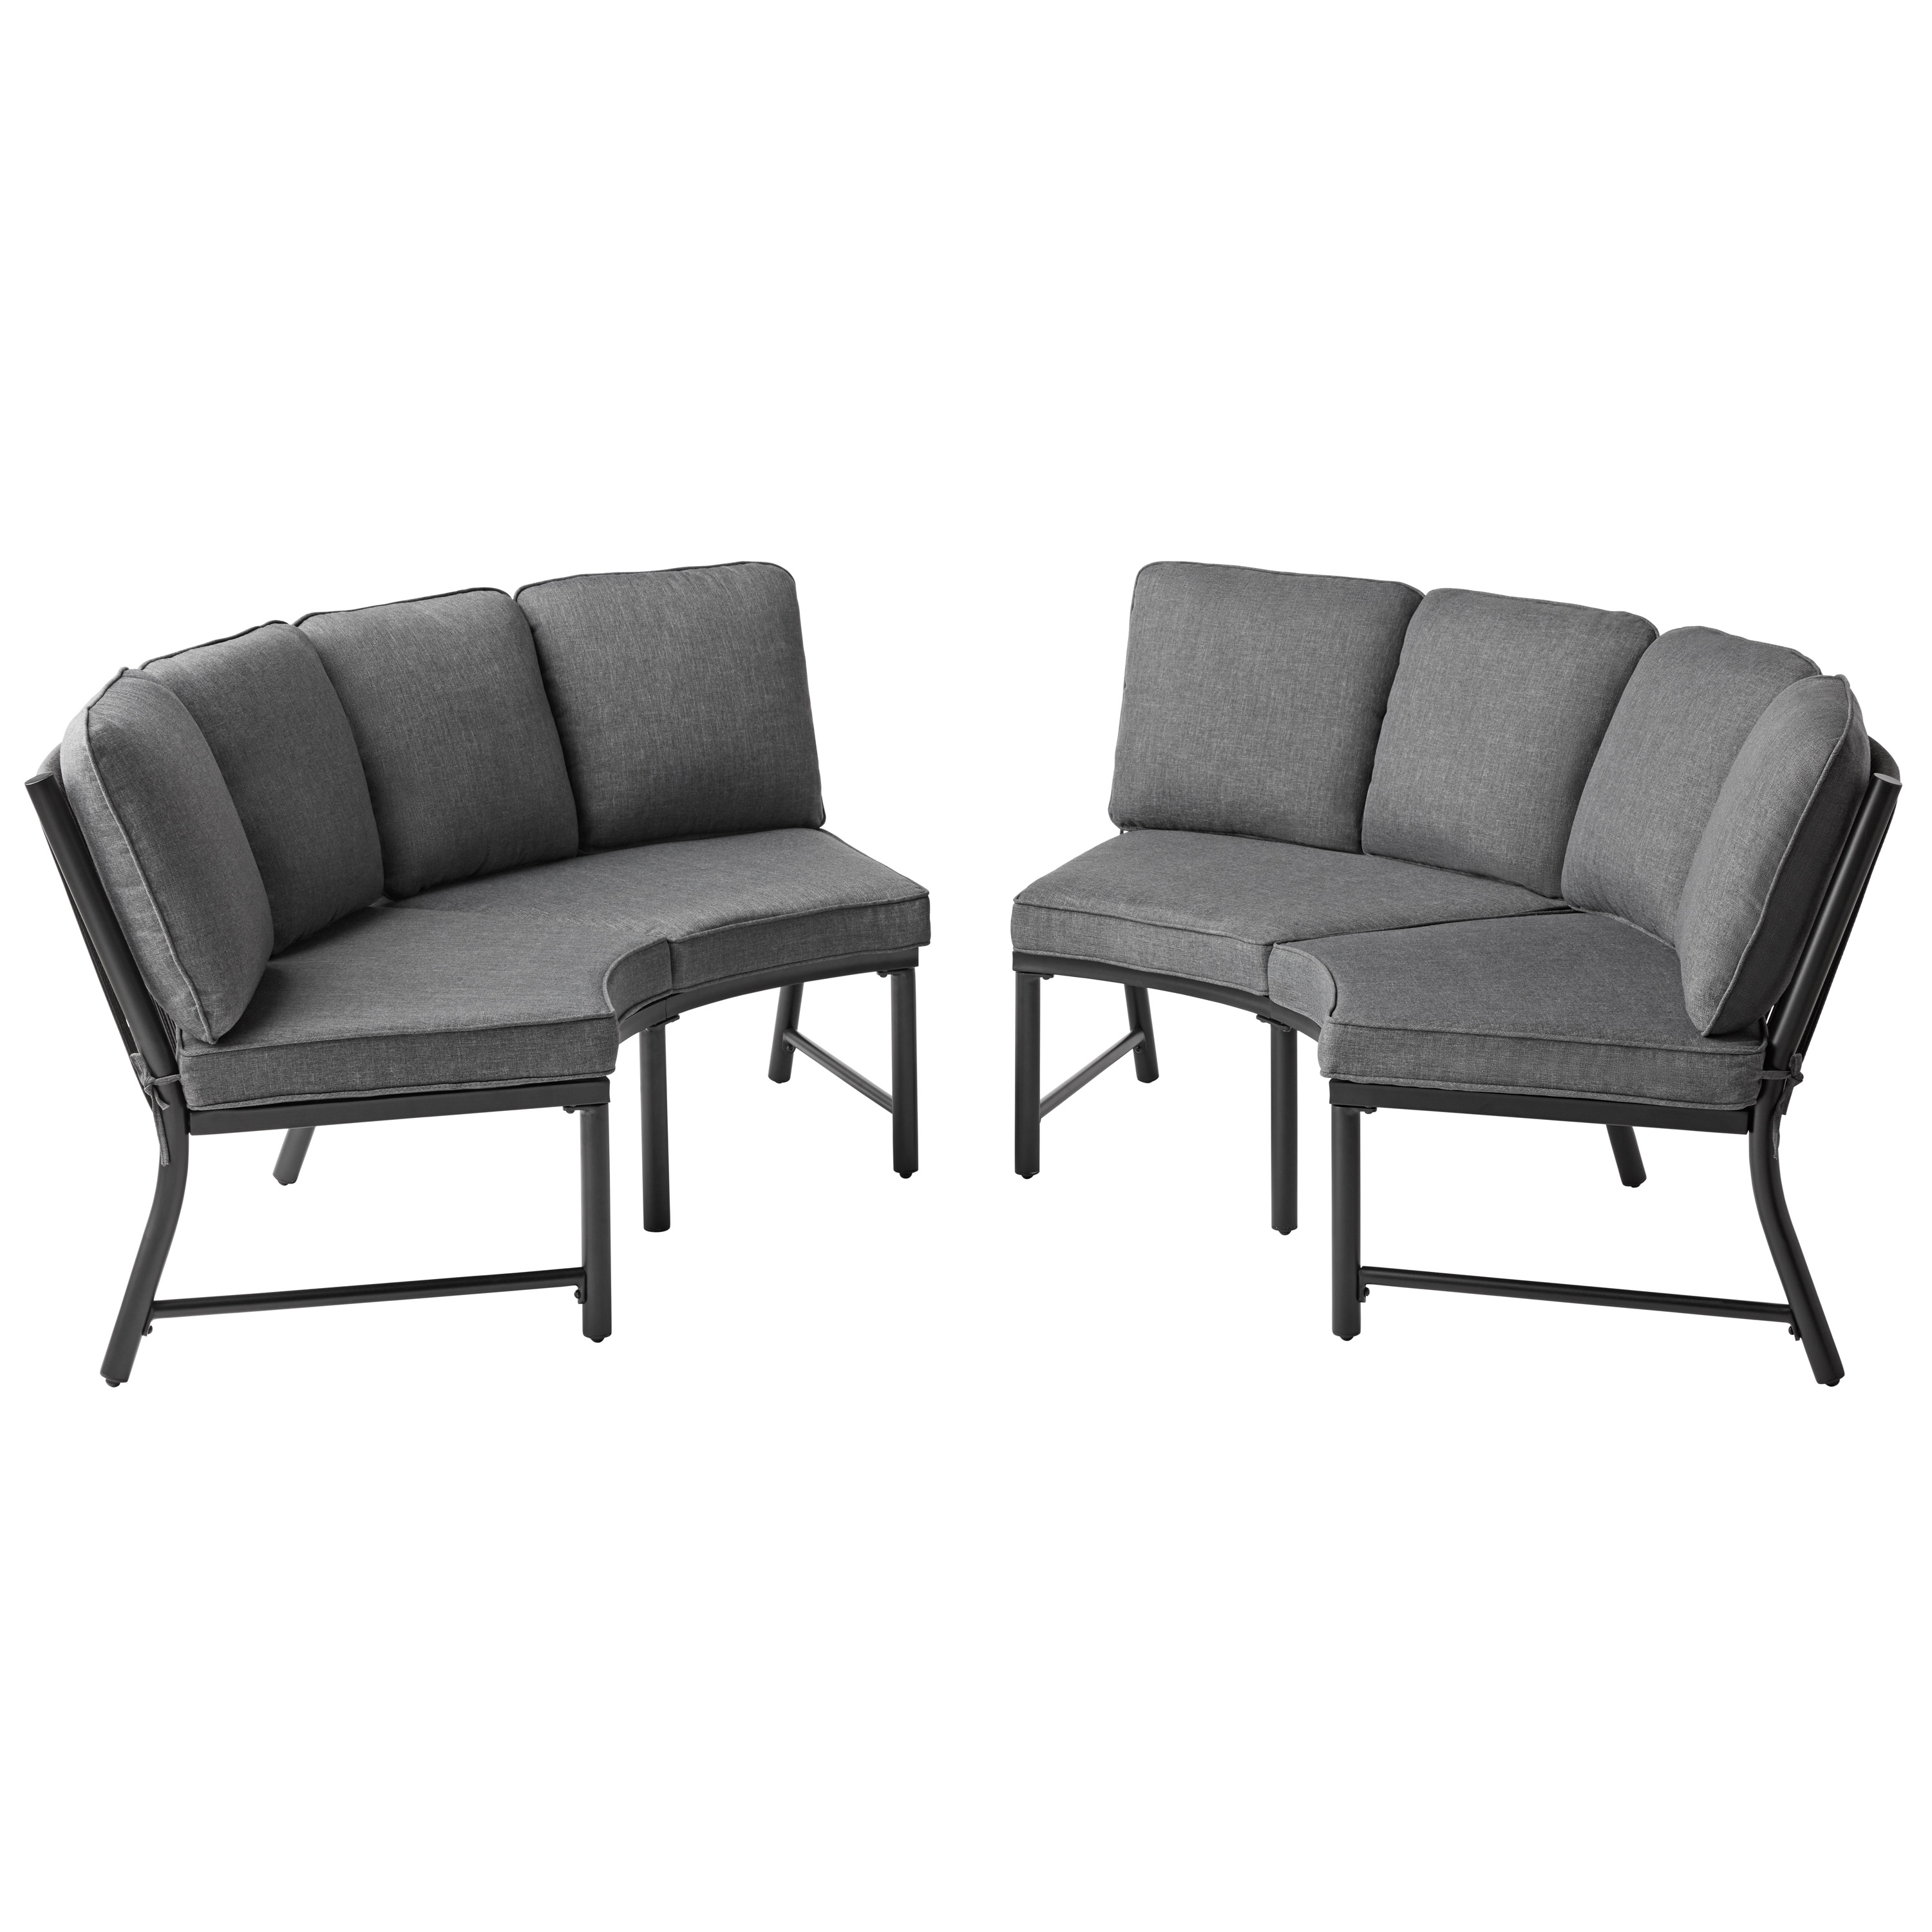 Mainstays Lawson Ridge 3-Piece Steel Curved Outdoor Sectional Set with Cushions, Gray - image 4 of 8